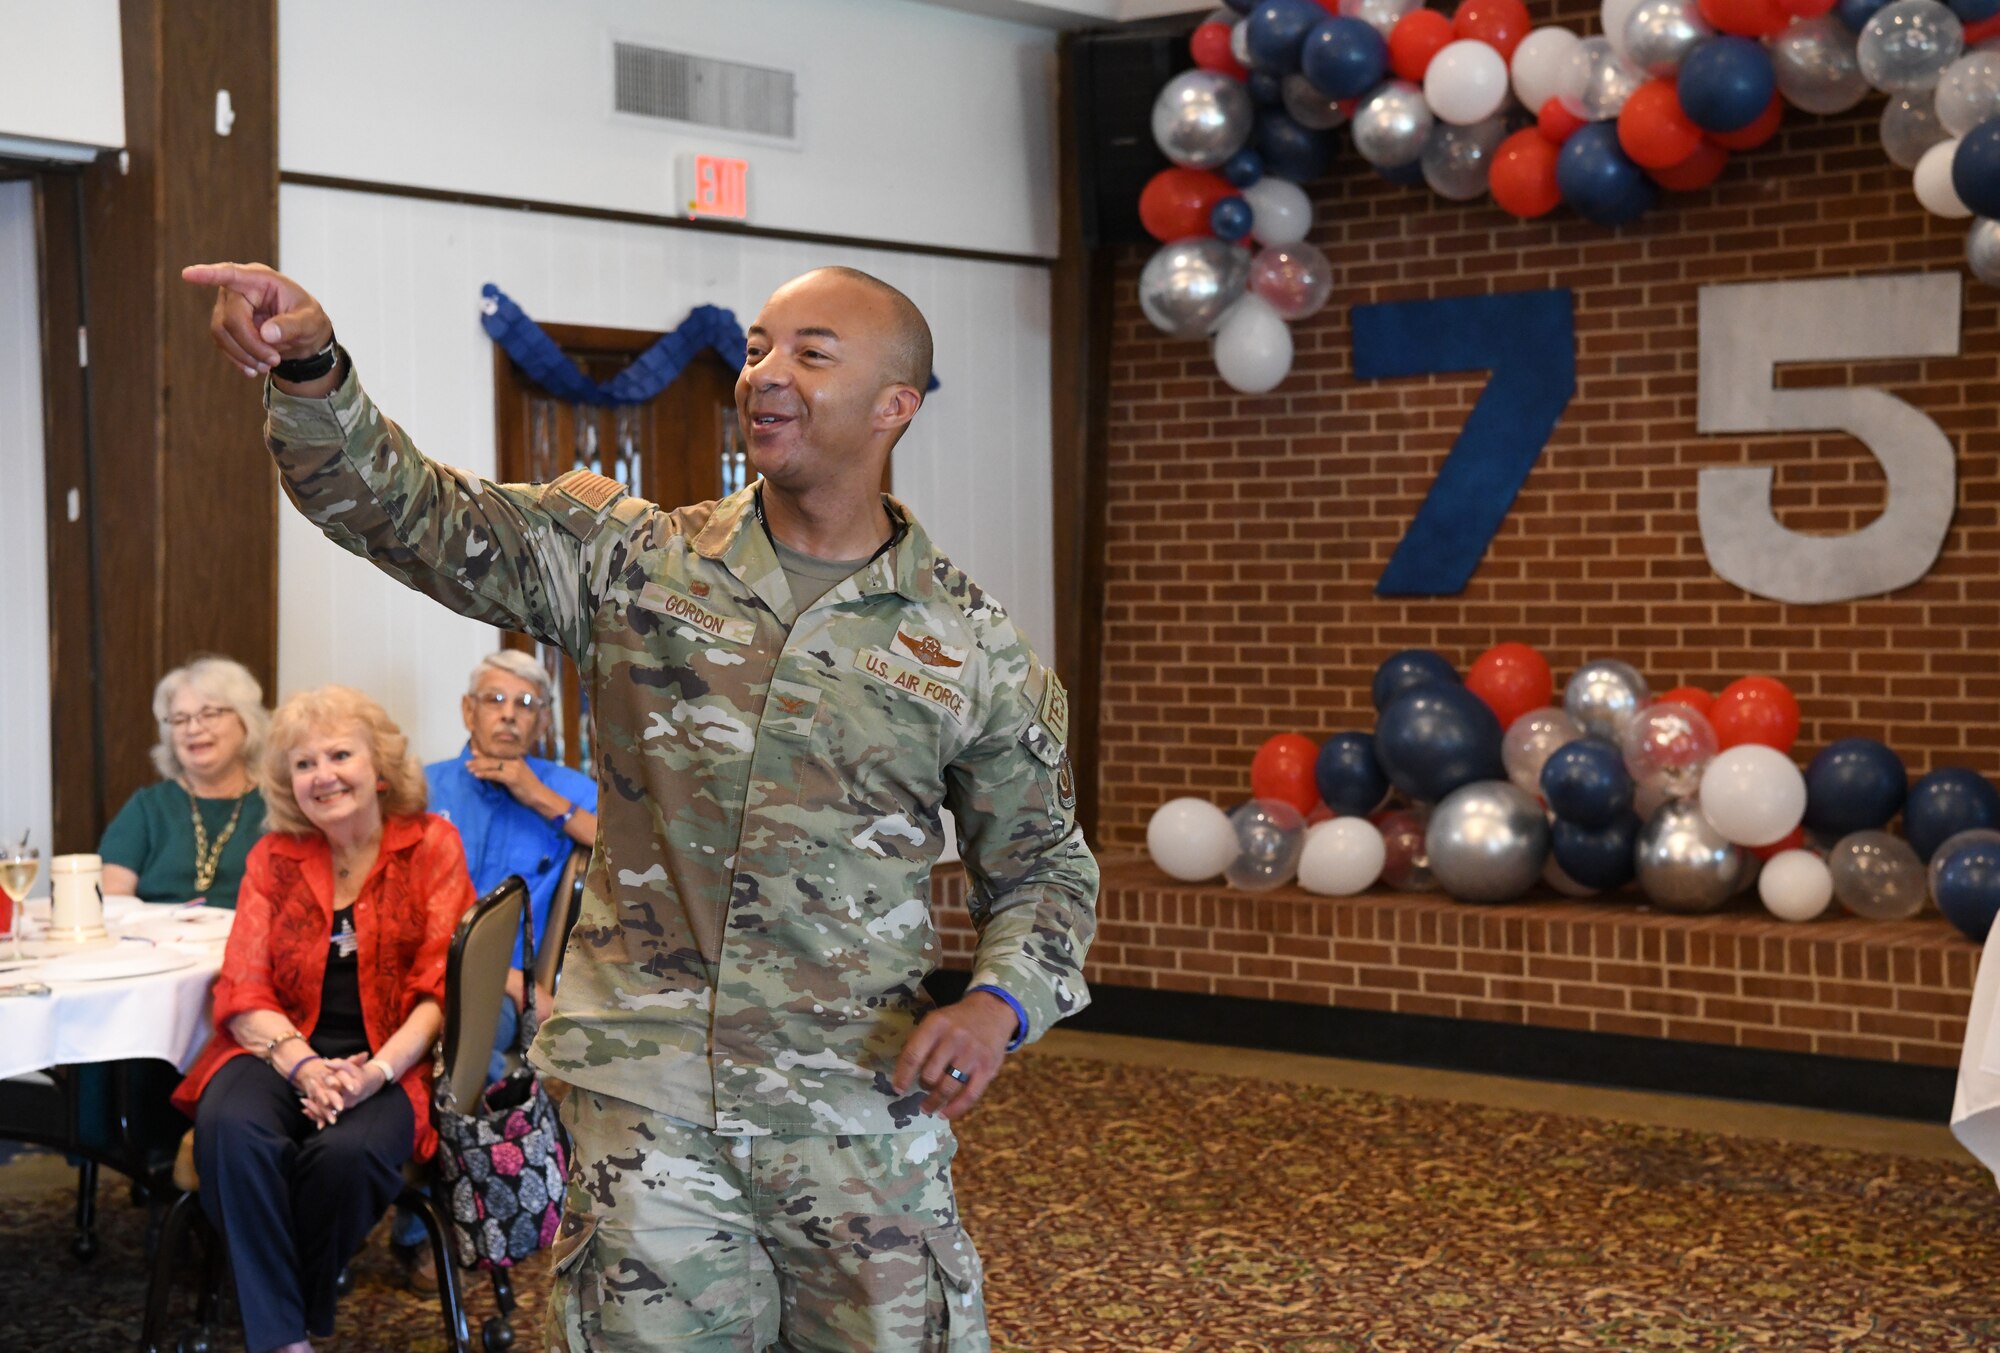 Airman pointing while speaking